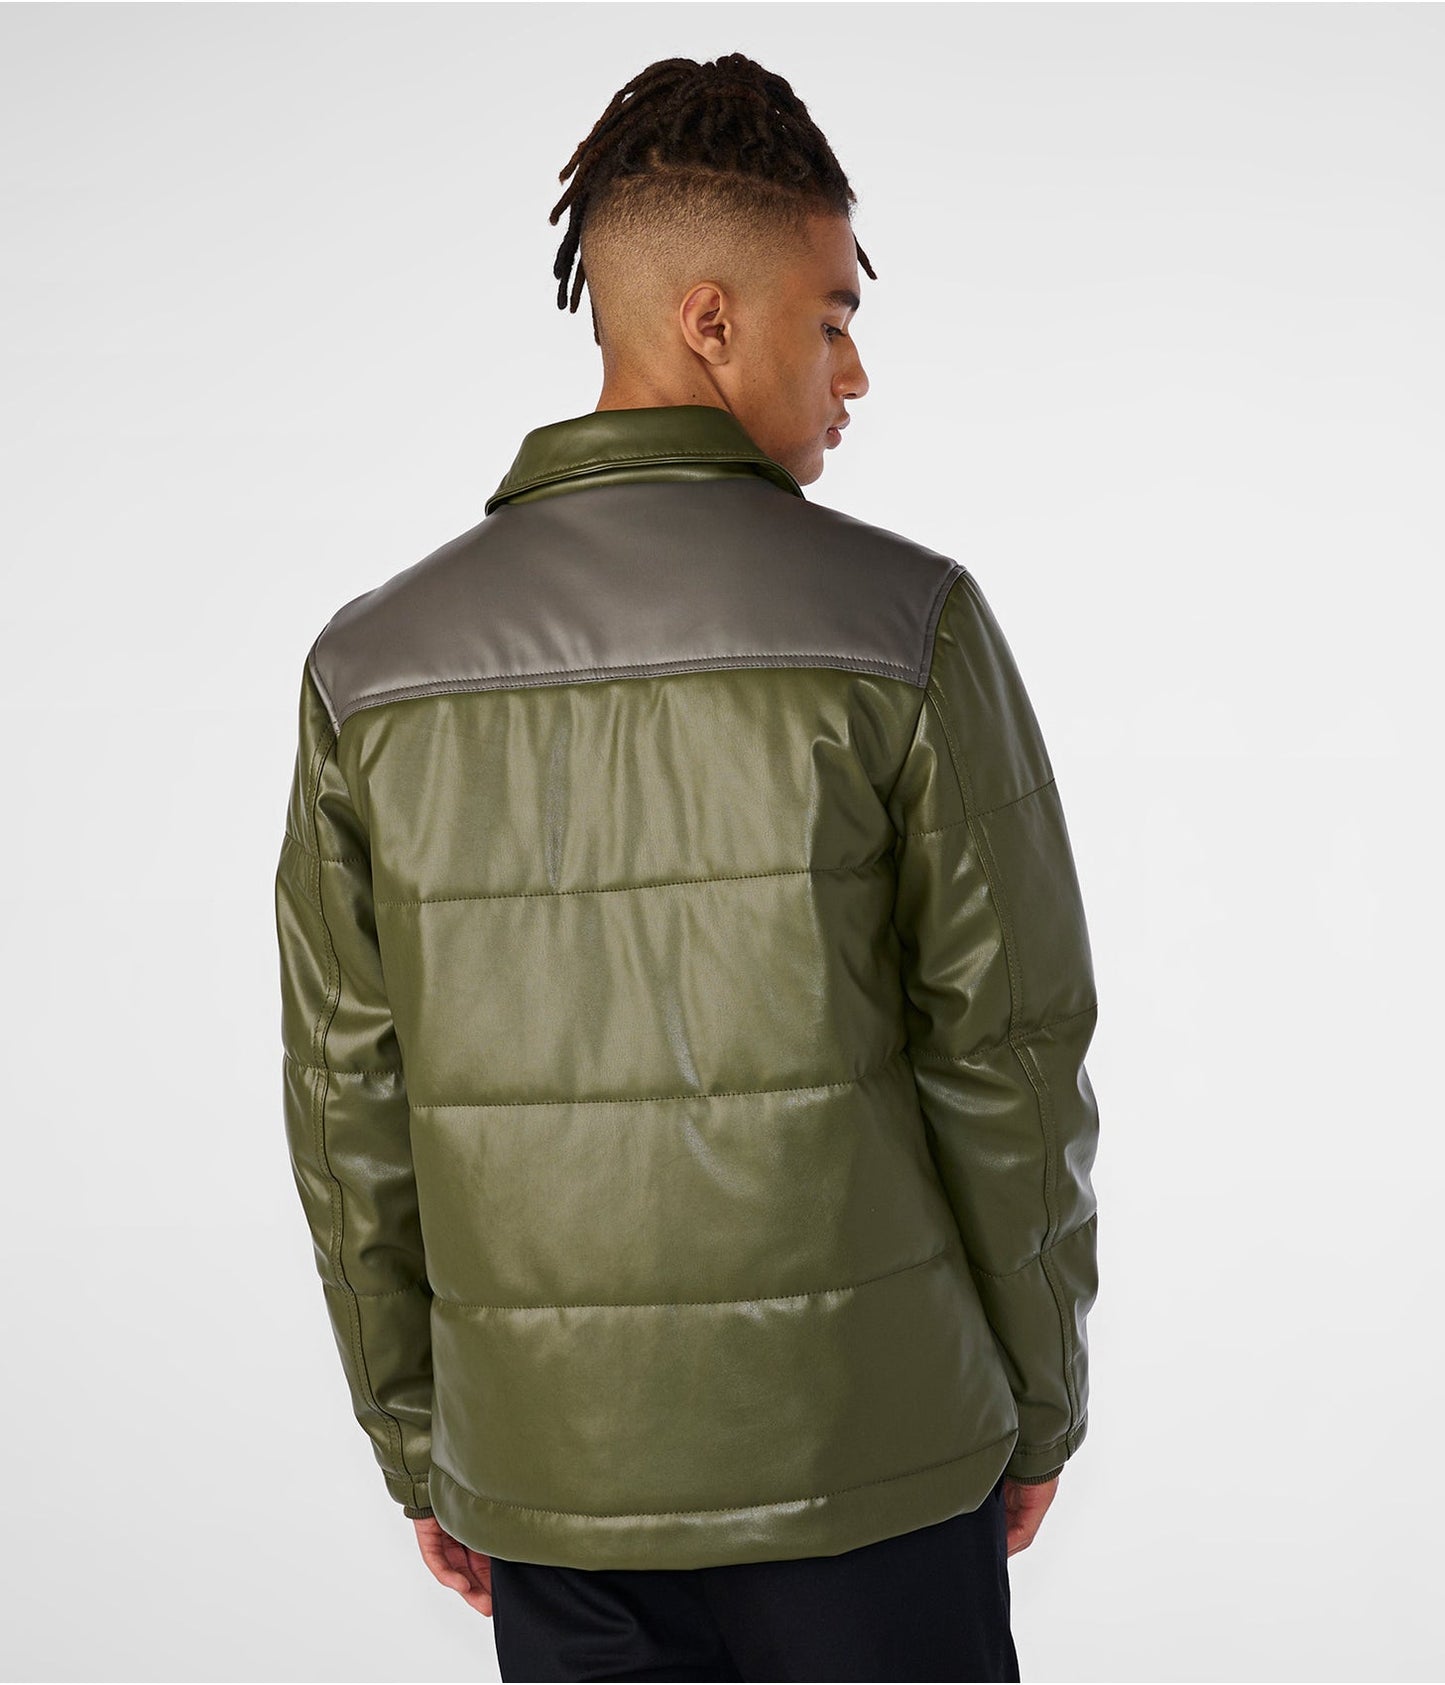 Men's Leather Puffer Jacket With Removable Shearling Collar